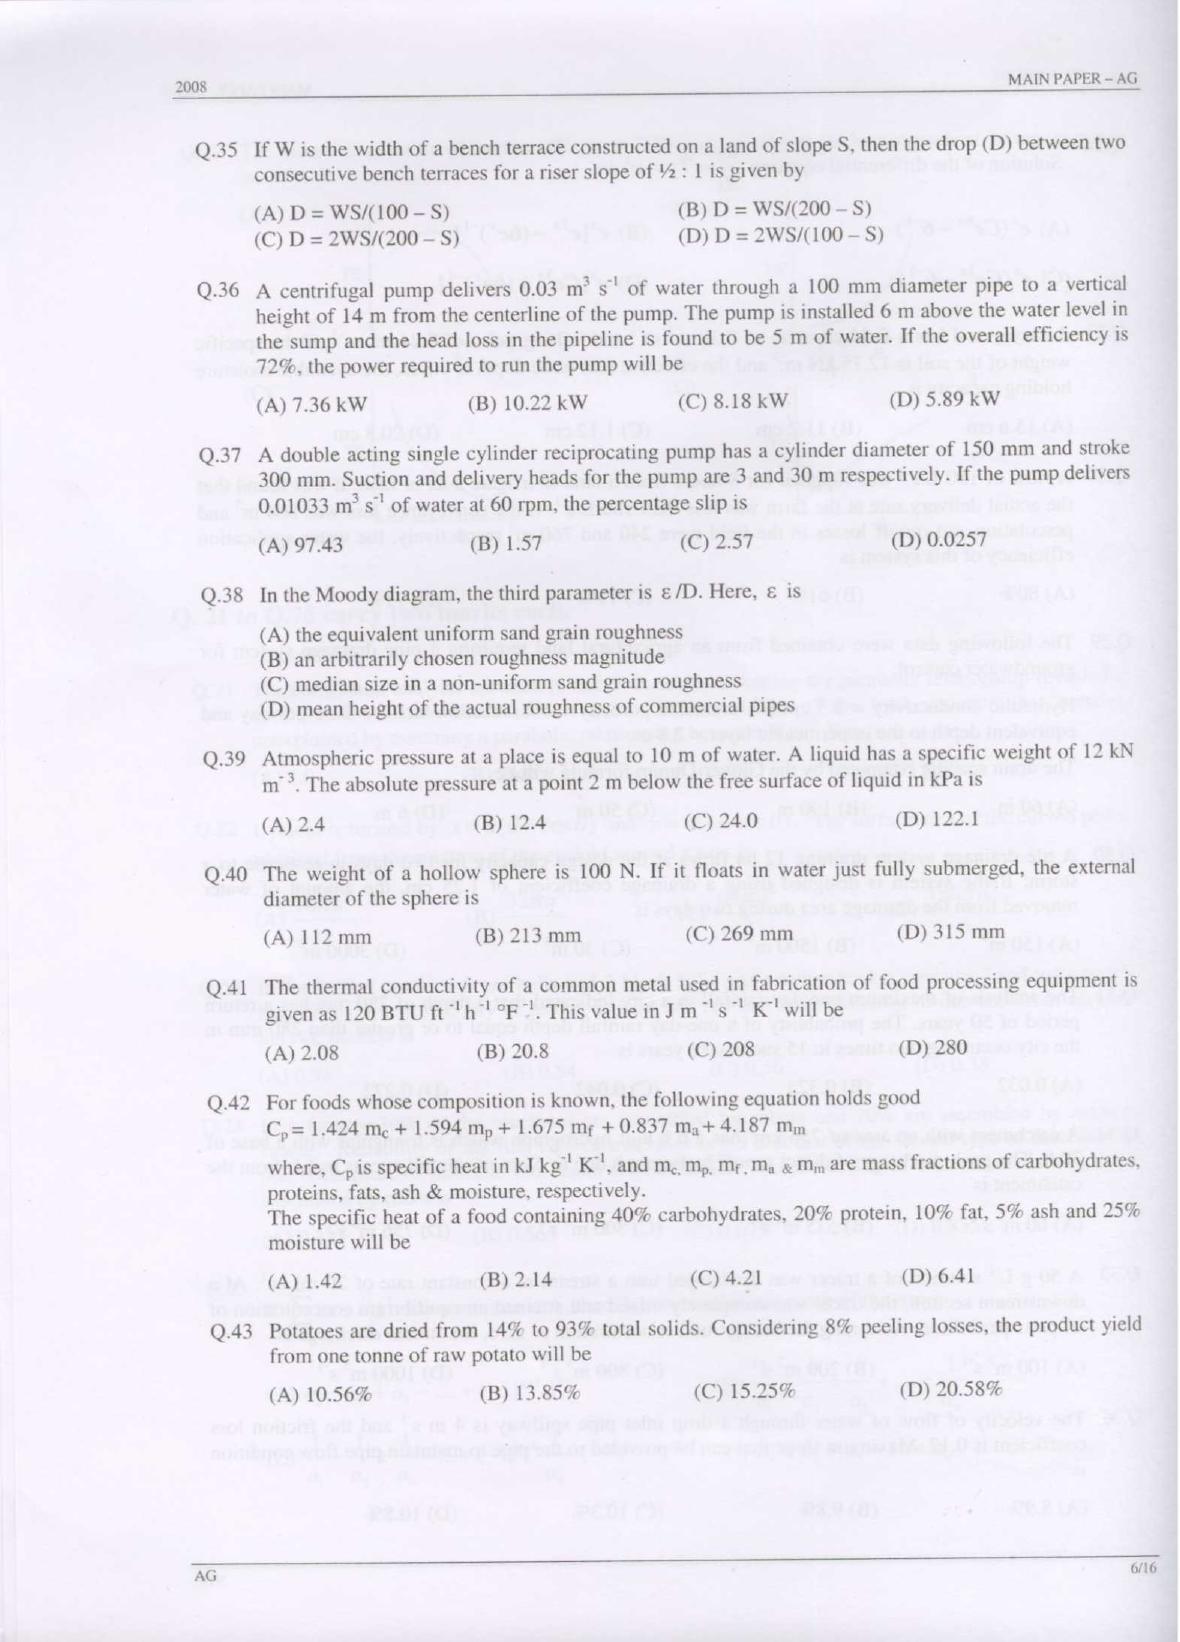 GATE 2008 Agricultural Engineering (AG) Question Paper with Answer Key - Page 6